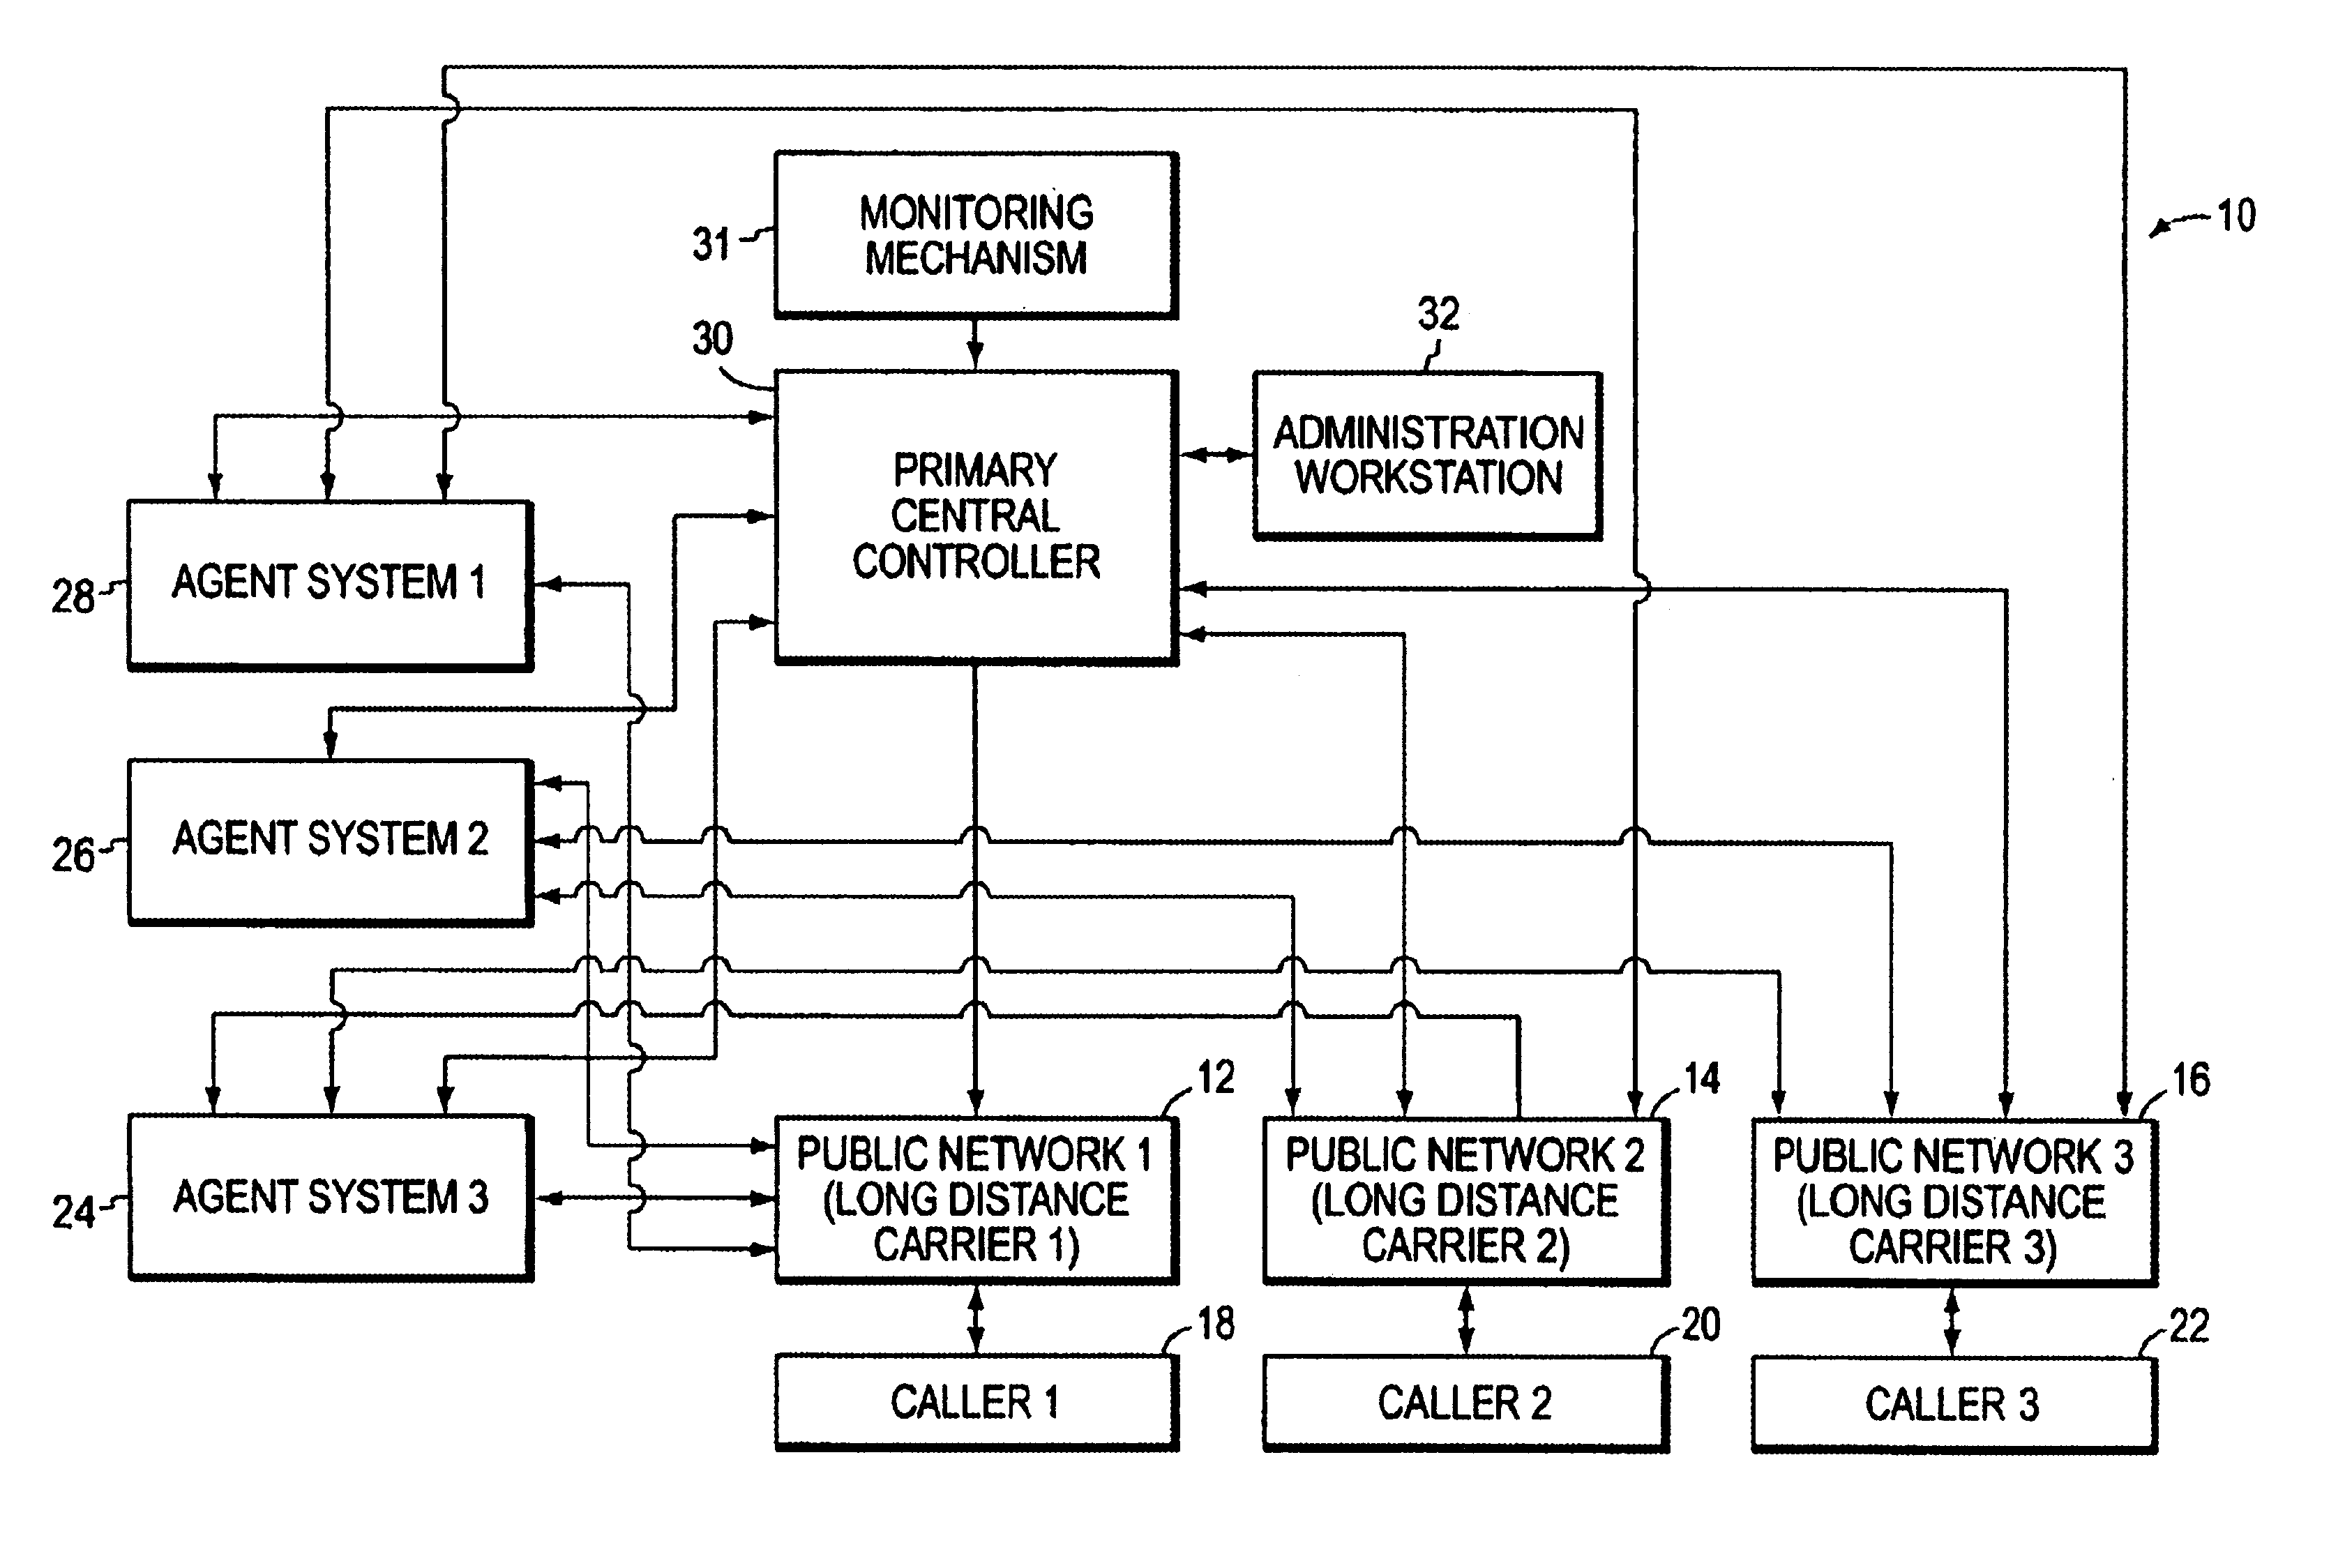 Generation of communication system control scripts